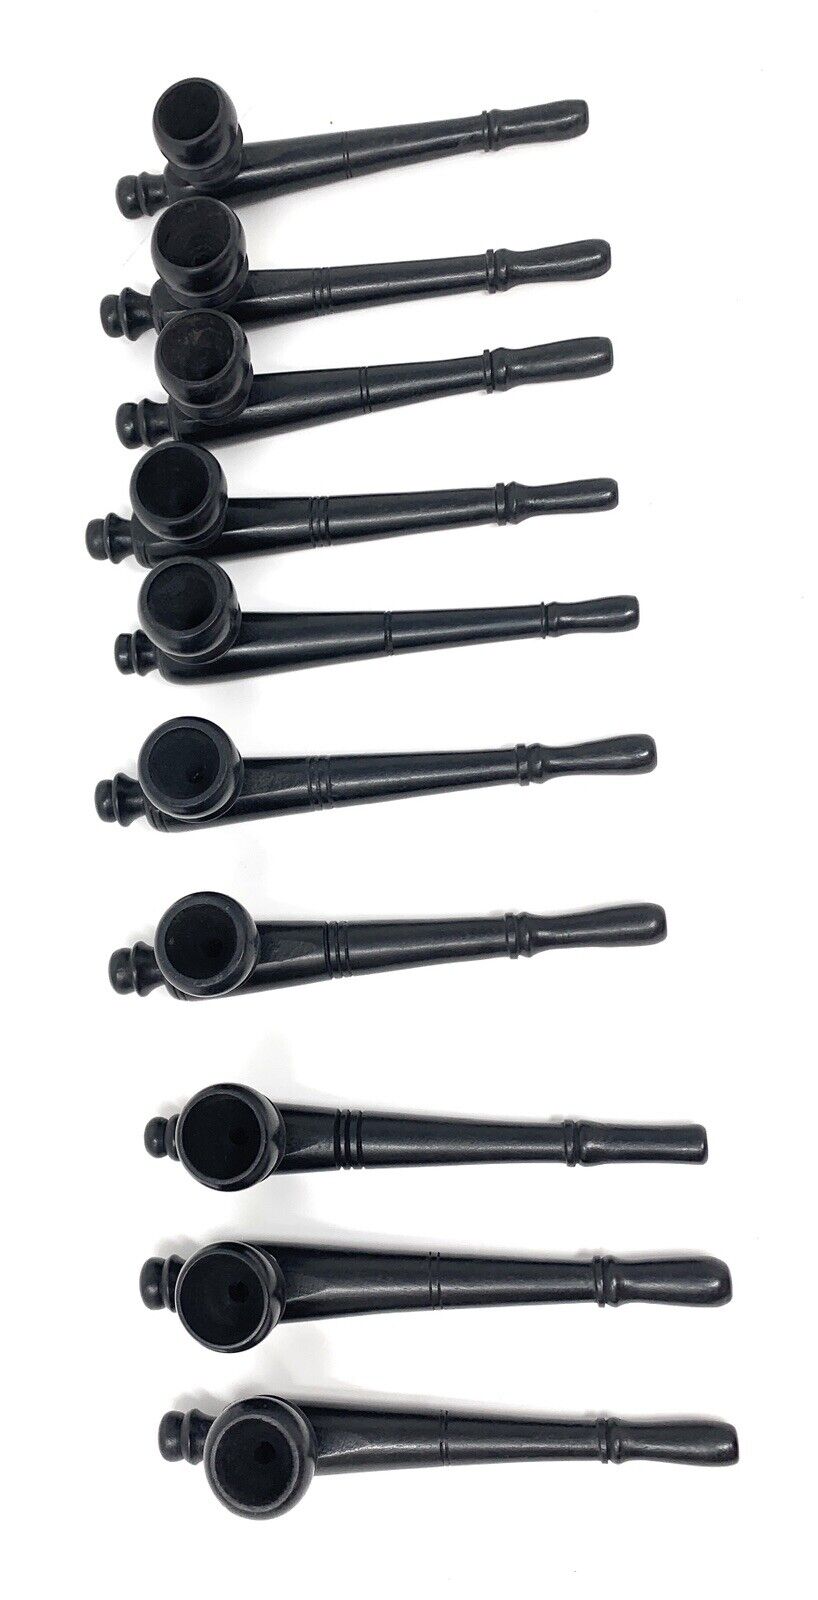 WholeSale Lot 10 Pipes- Black Ebony Wood Smoking Tobacco Pipes 5 inch long Matchpipe